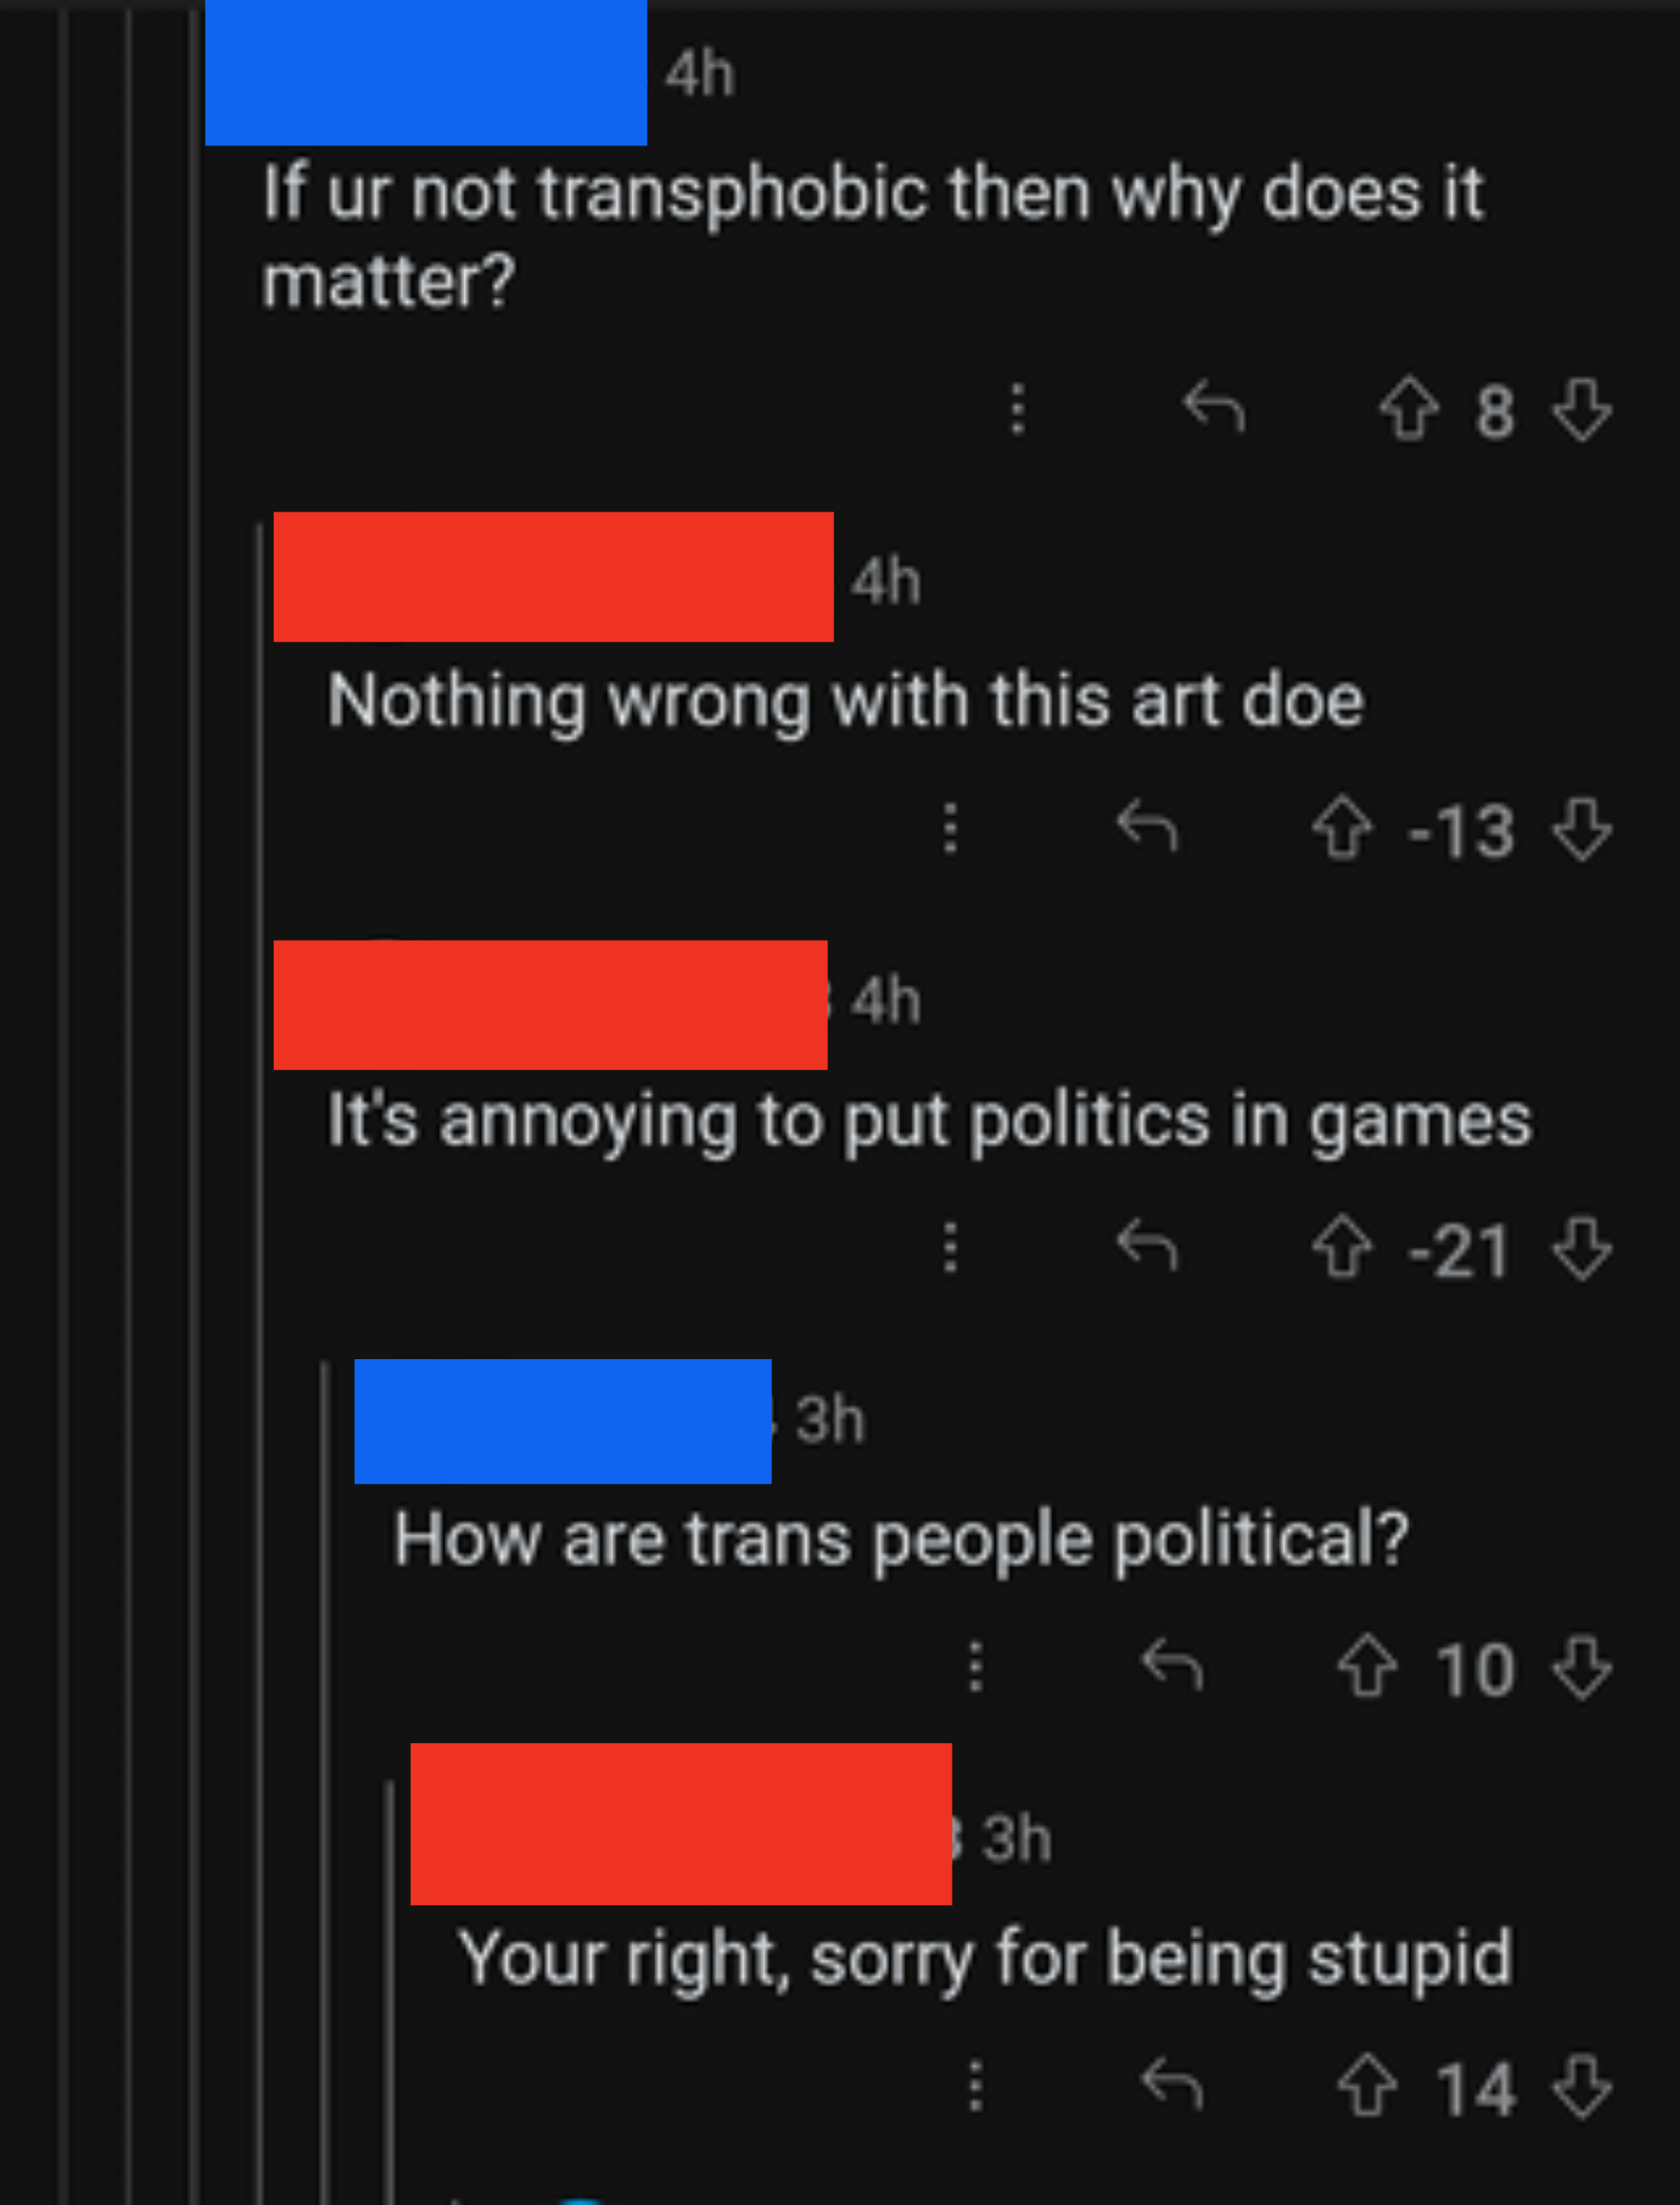 someone asks them how trans people are politcal